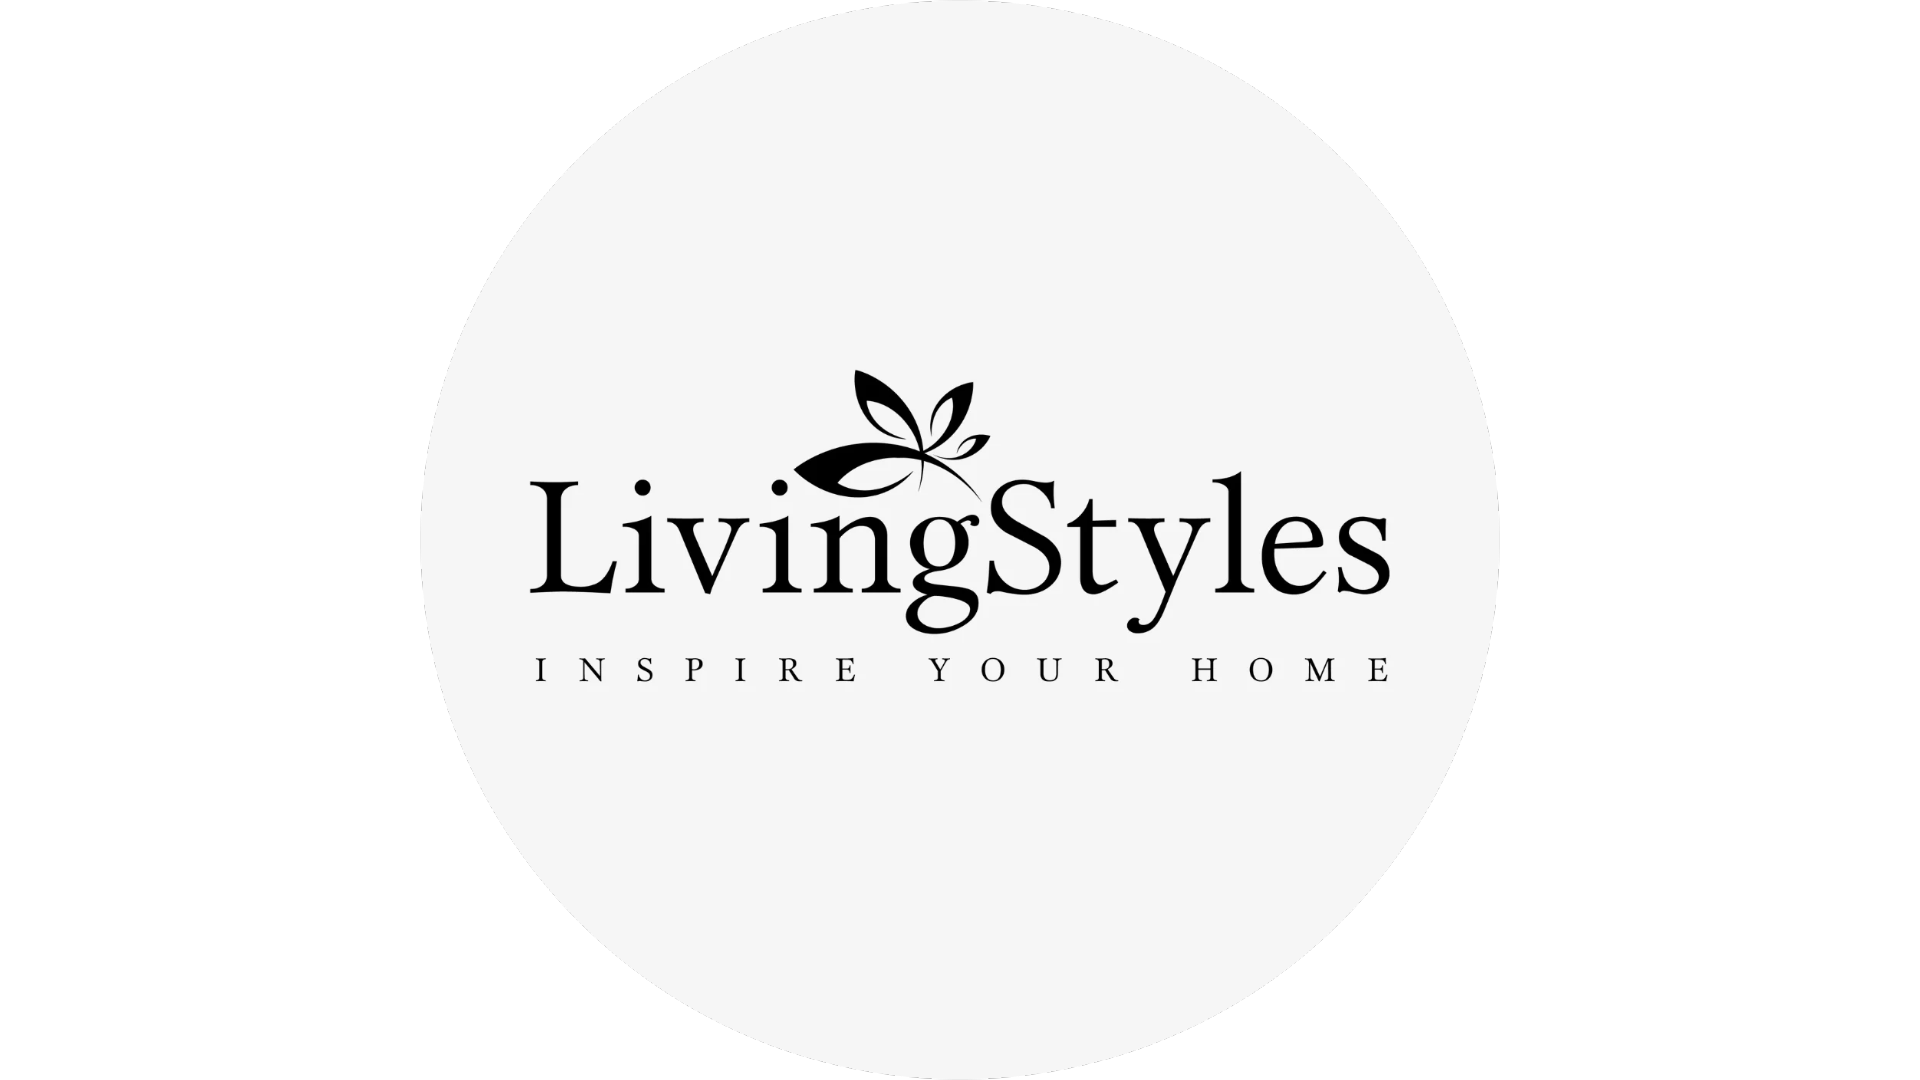 Get the Farmhouse style with Living Styles